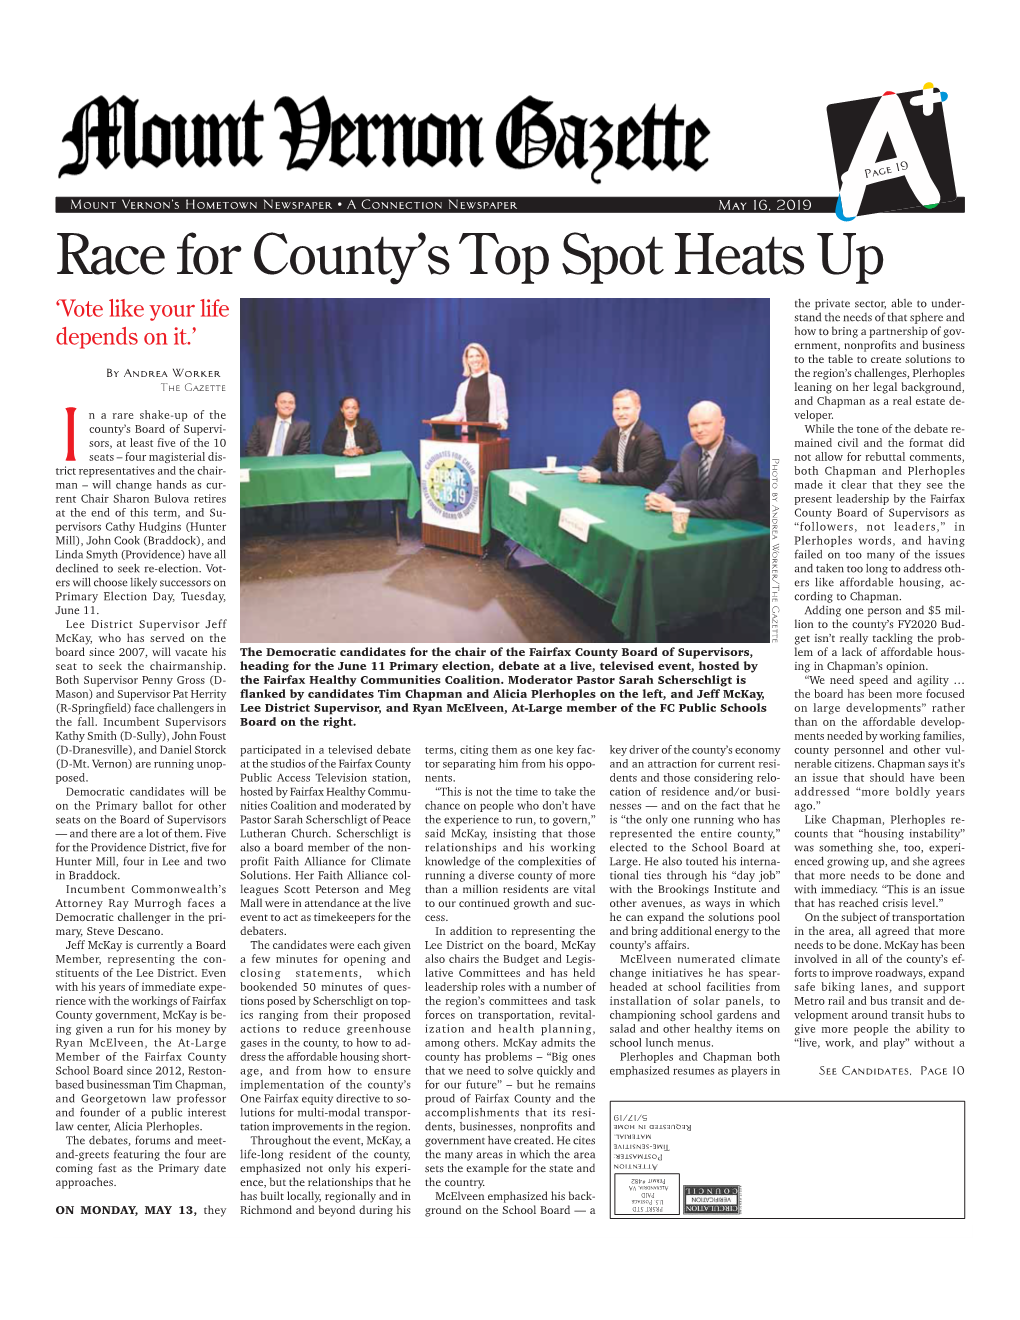 Race for County's Top Spot Heats Up